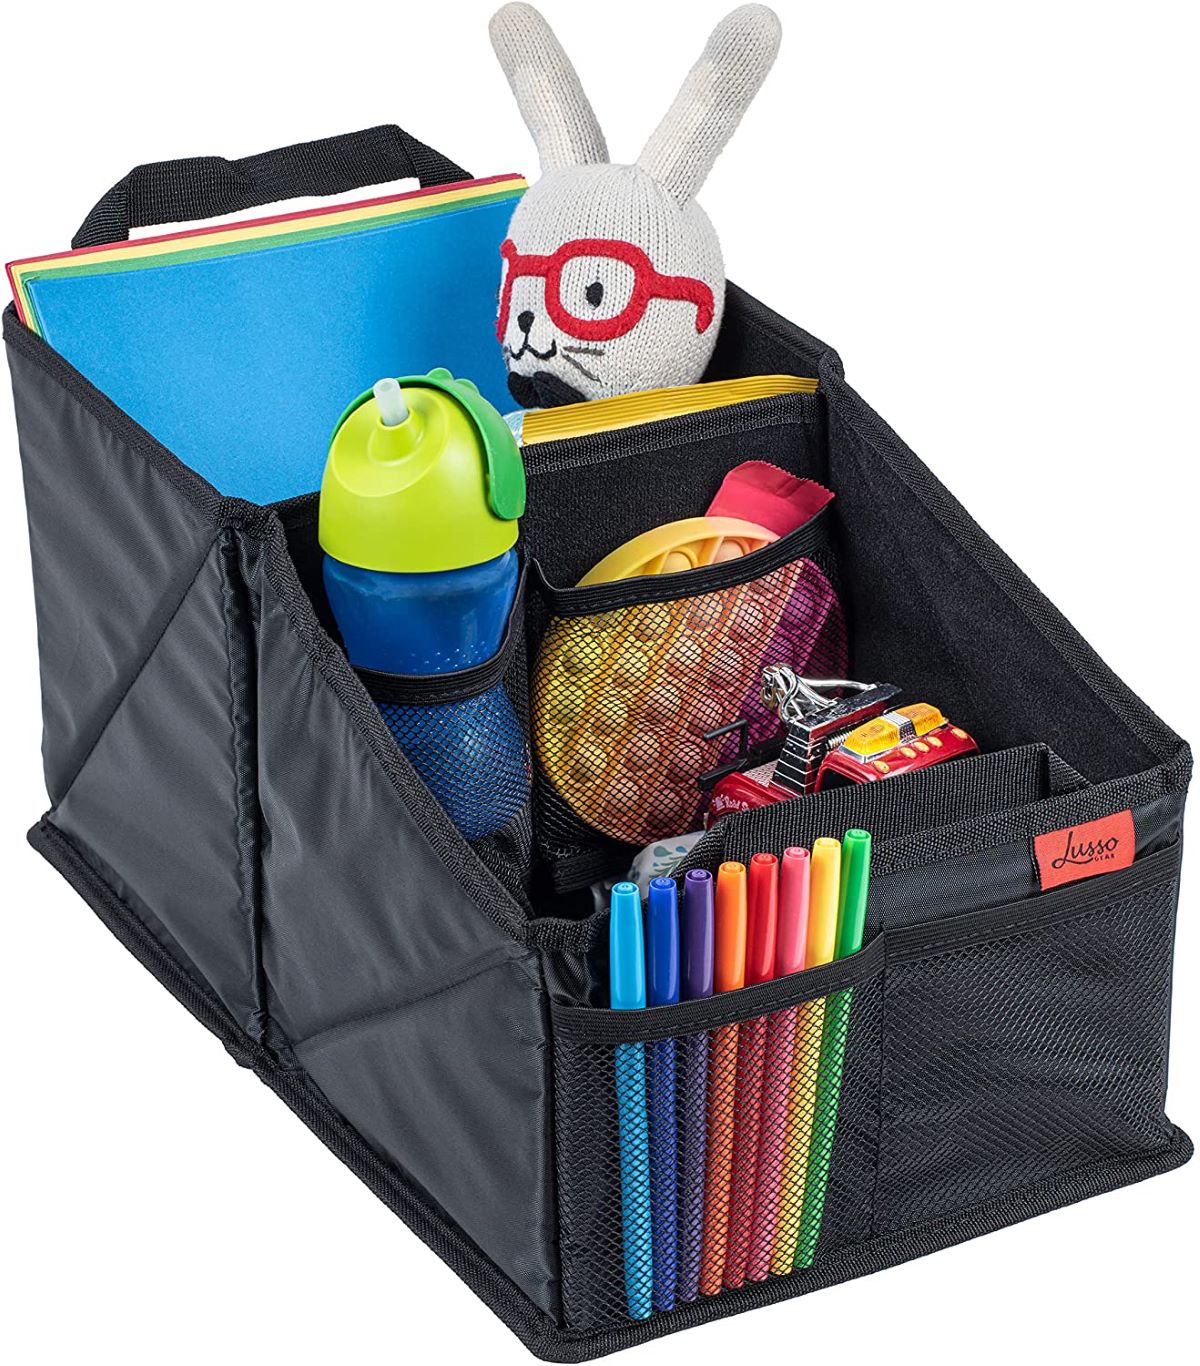 A car organizer tote filled with children's toys. A tote like this is one of the best car storage accessories